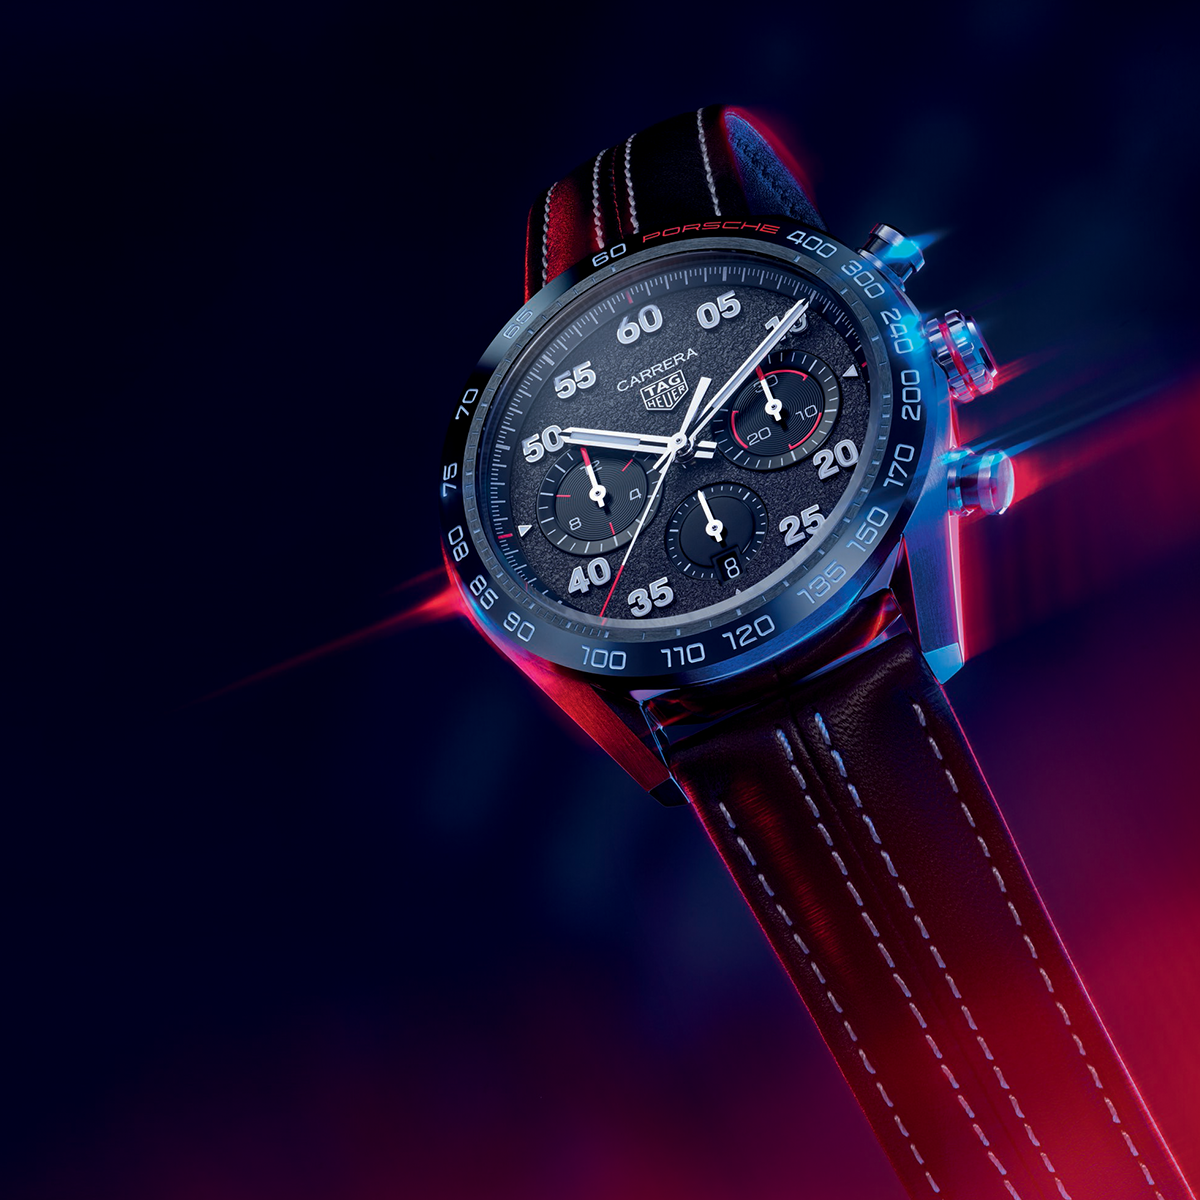 TAG HEUER: One Name, Two Legends